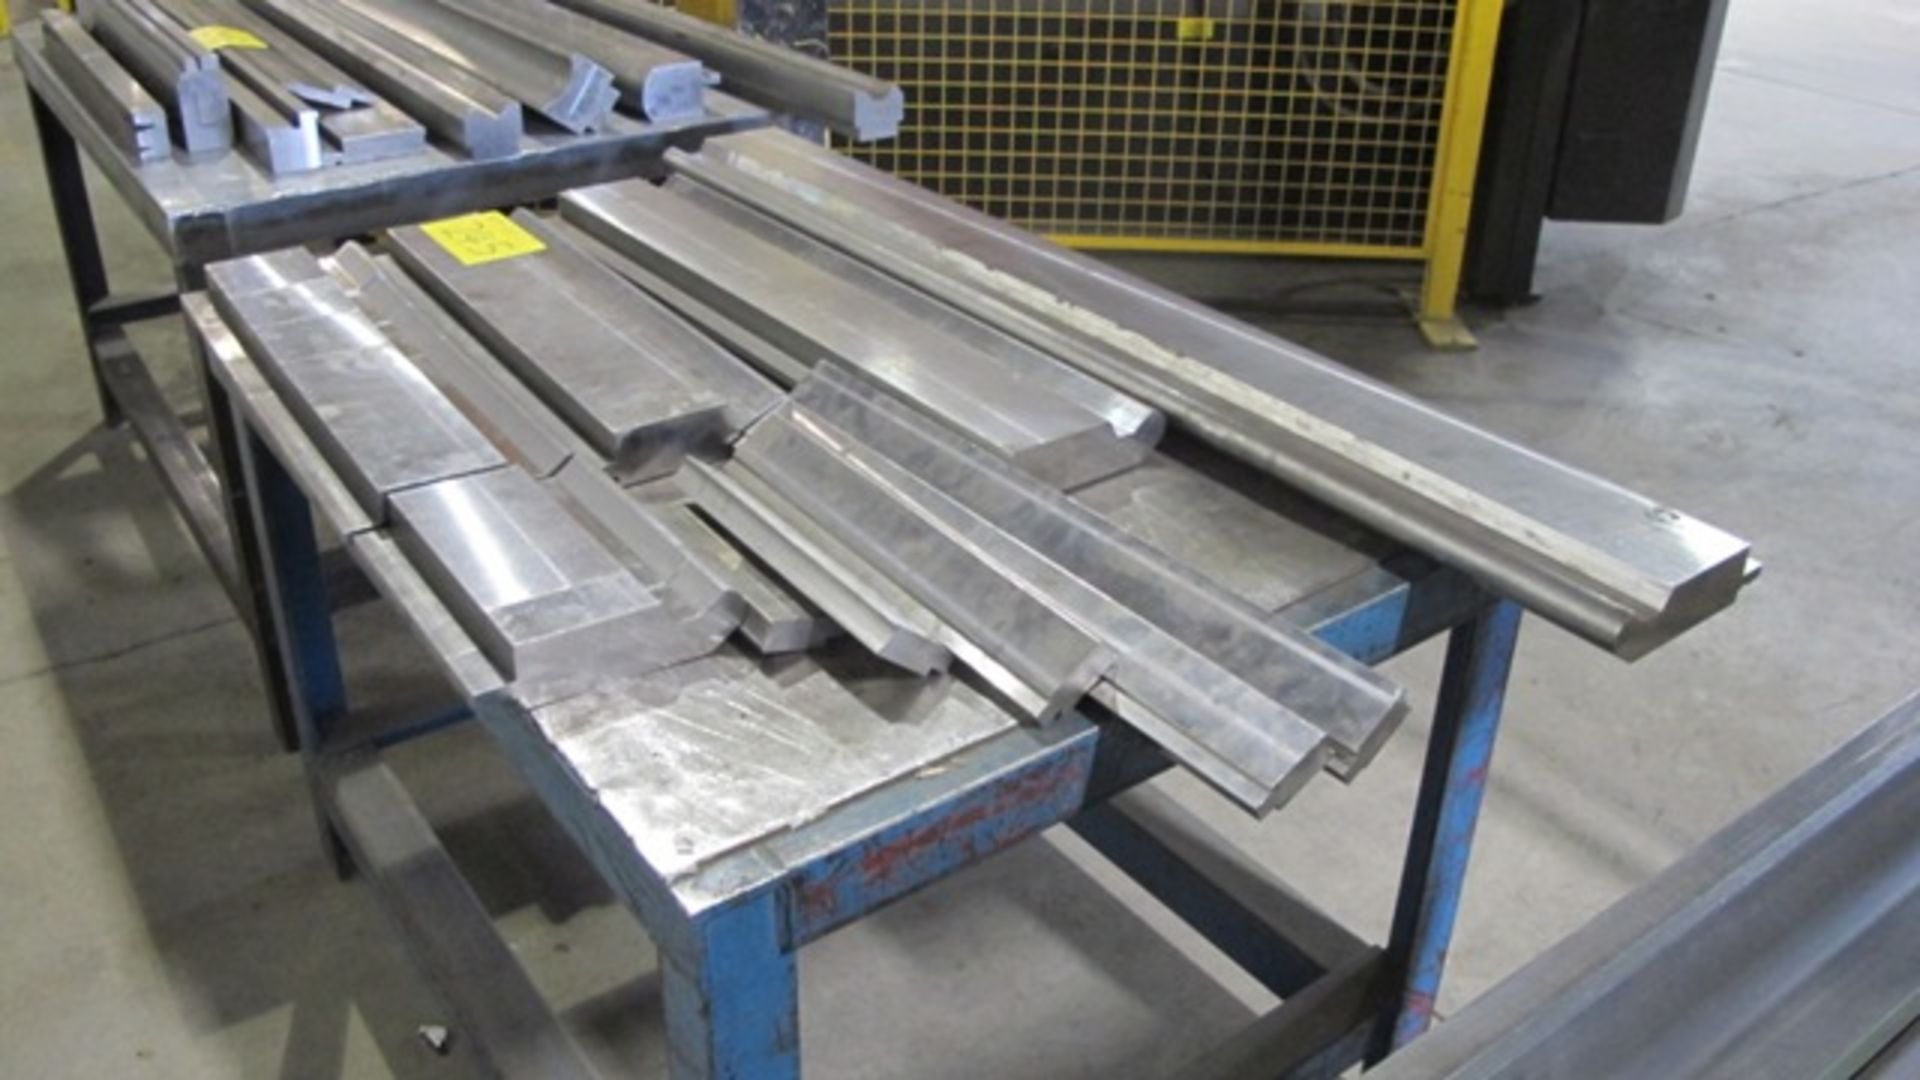 QUANTITY OF PRESS BRAKE DIES (UP TO 64"L) W/3 METAL TABLES - Image 3 of 4